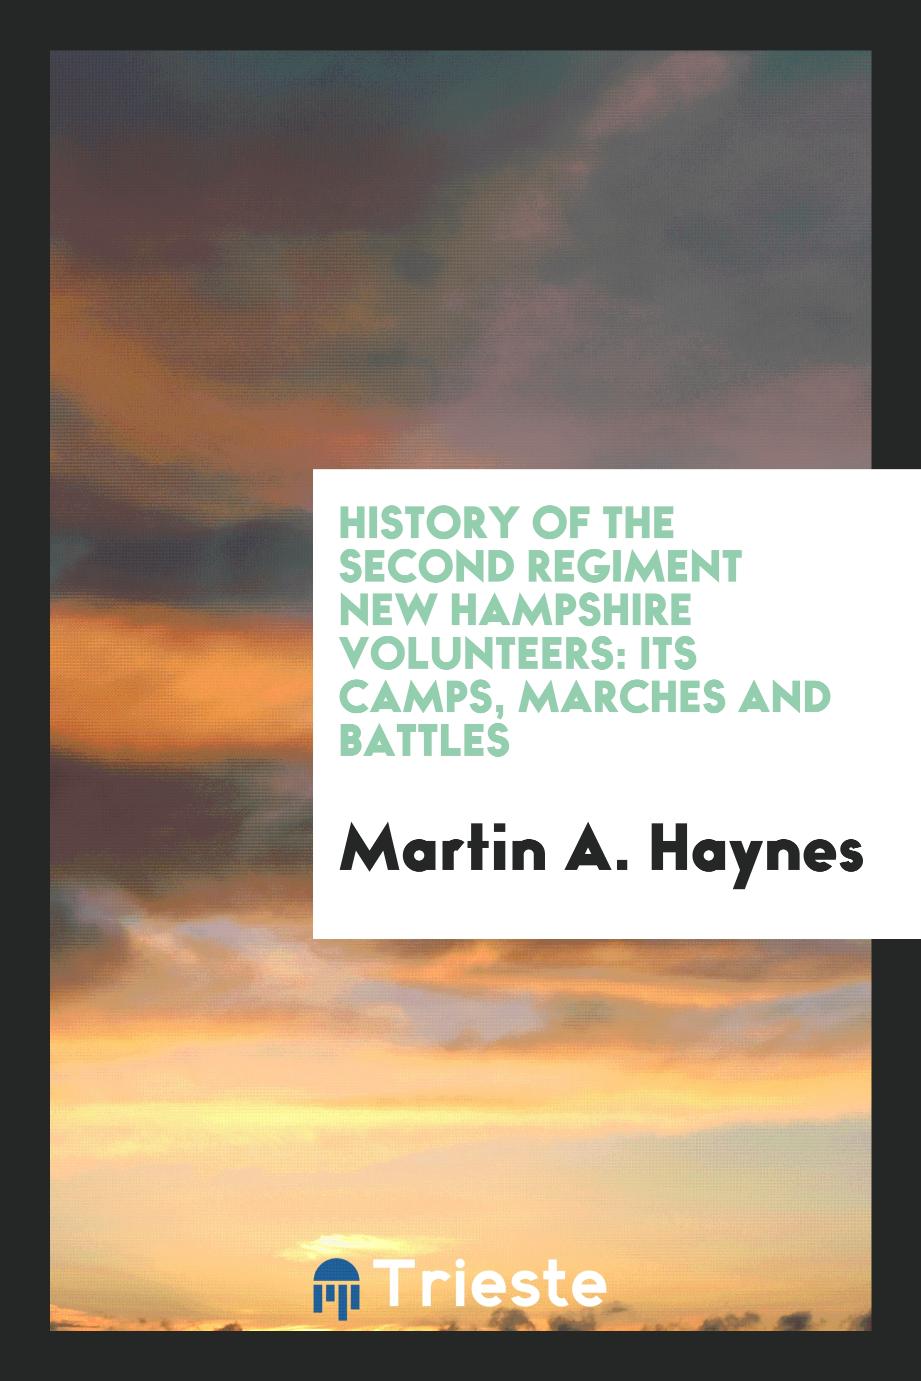 History of the Second Regiment New Hampshire Volunteers: its camps, marches and battles